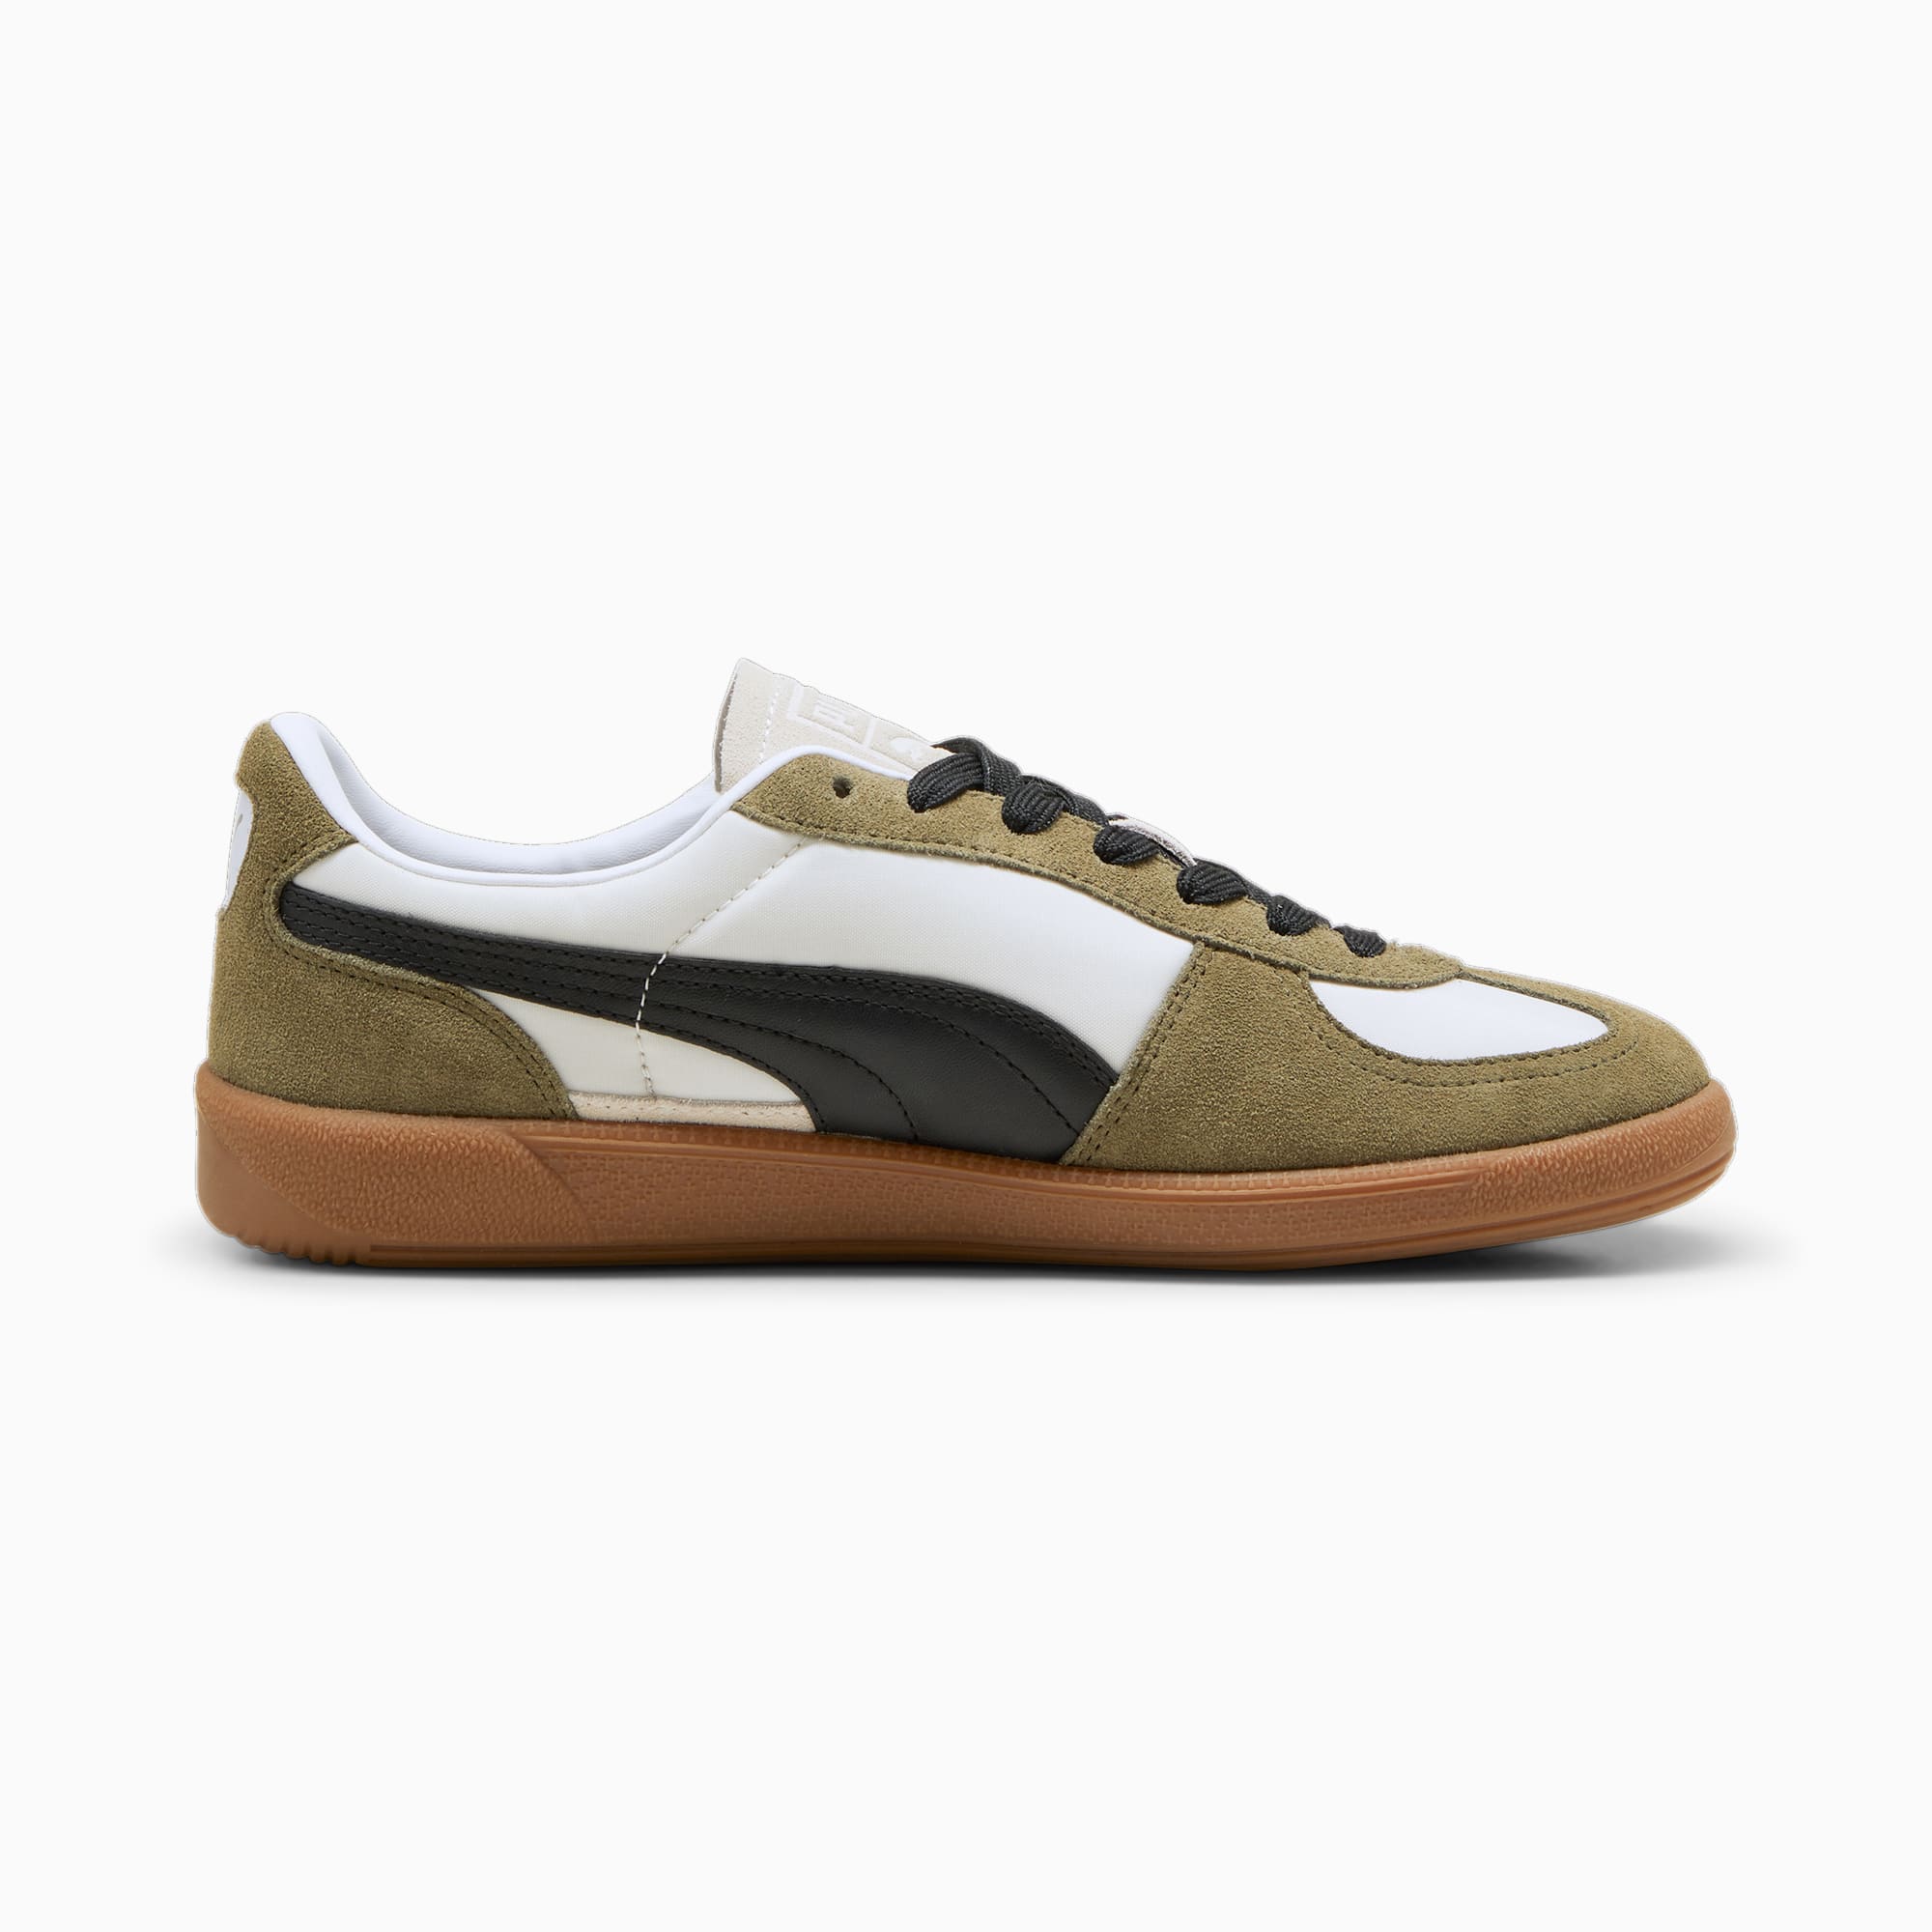 Women's PUMA Palermo OG Sneakers, Sugared Almond/Black/Olive, Size 35,5, Shoes